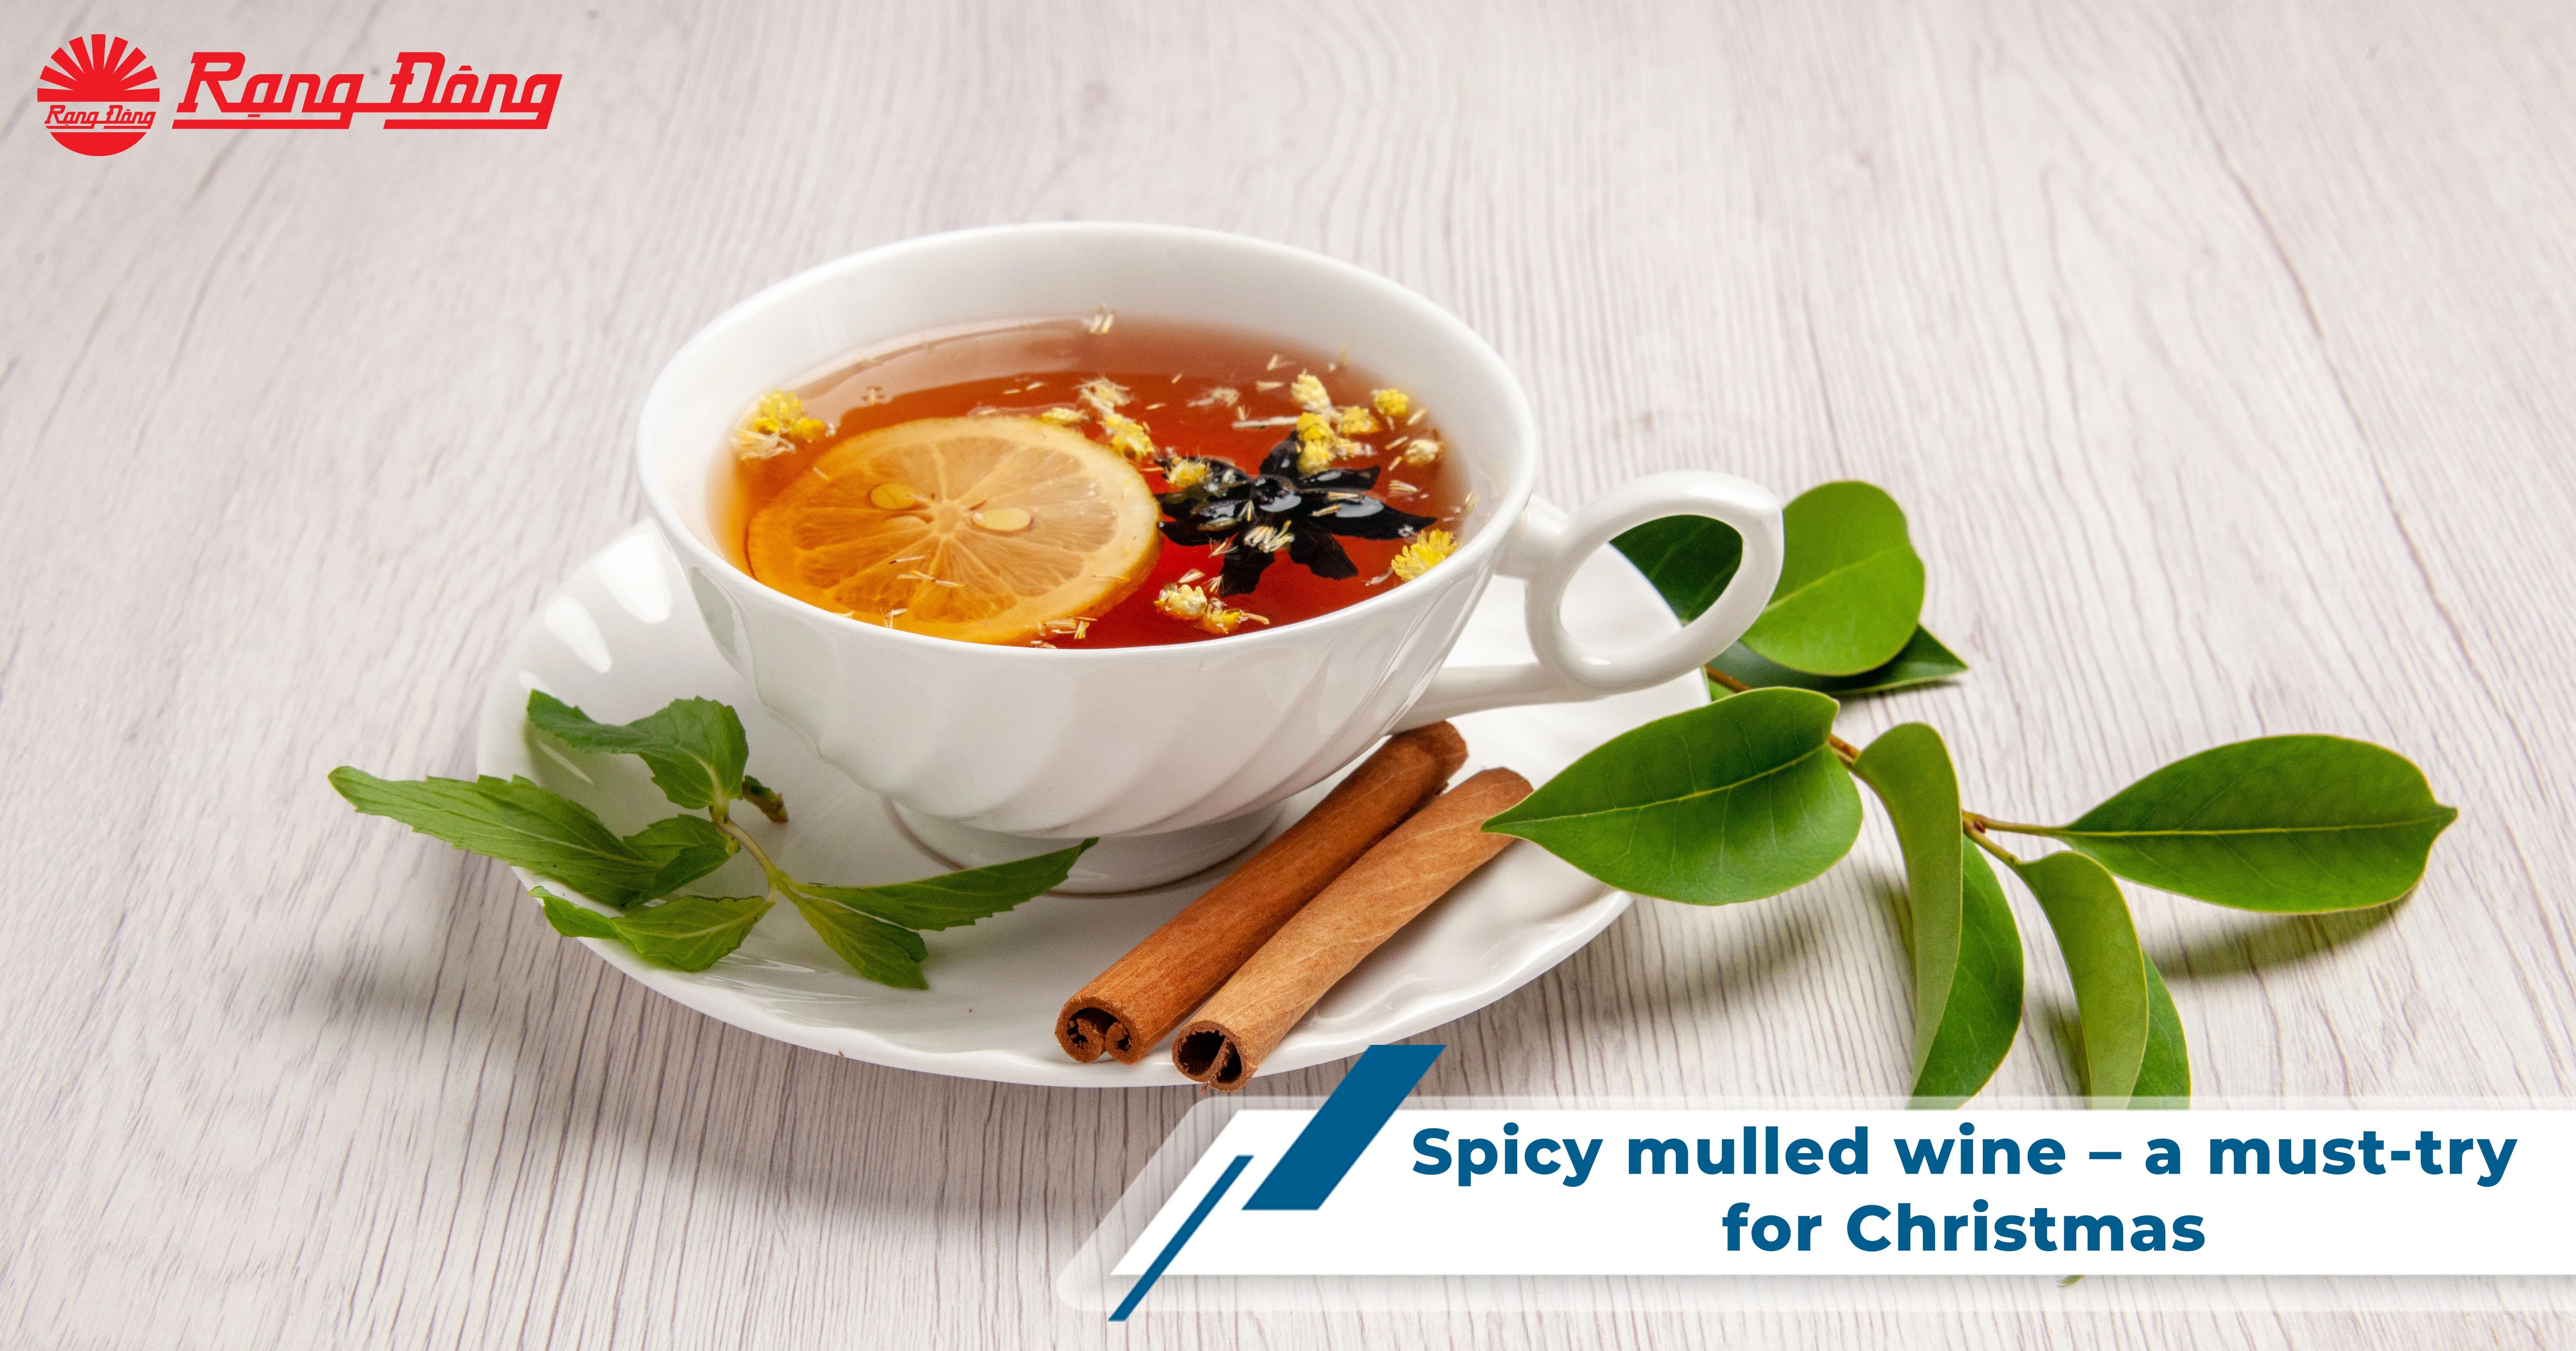 Spicy mulled wine – a must-try for Christmas